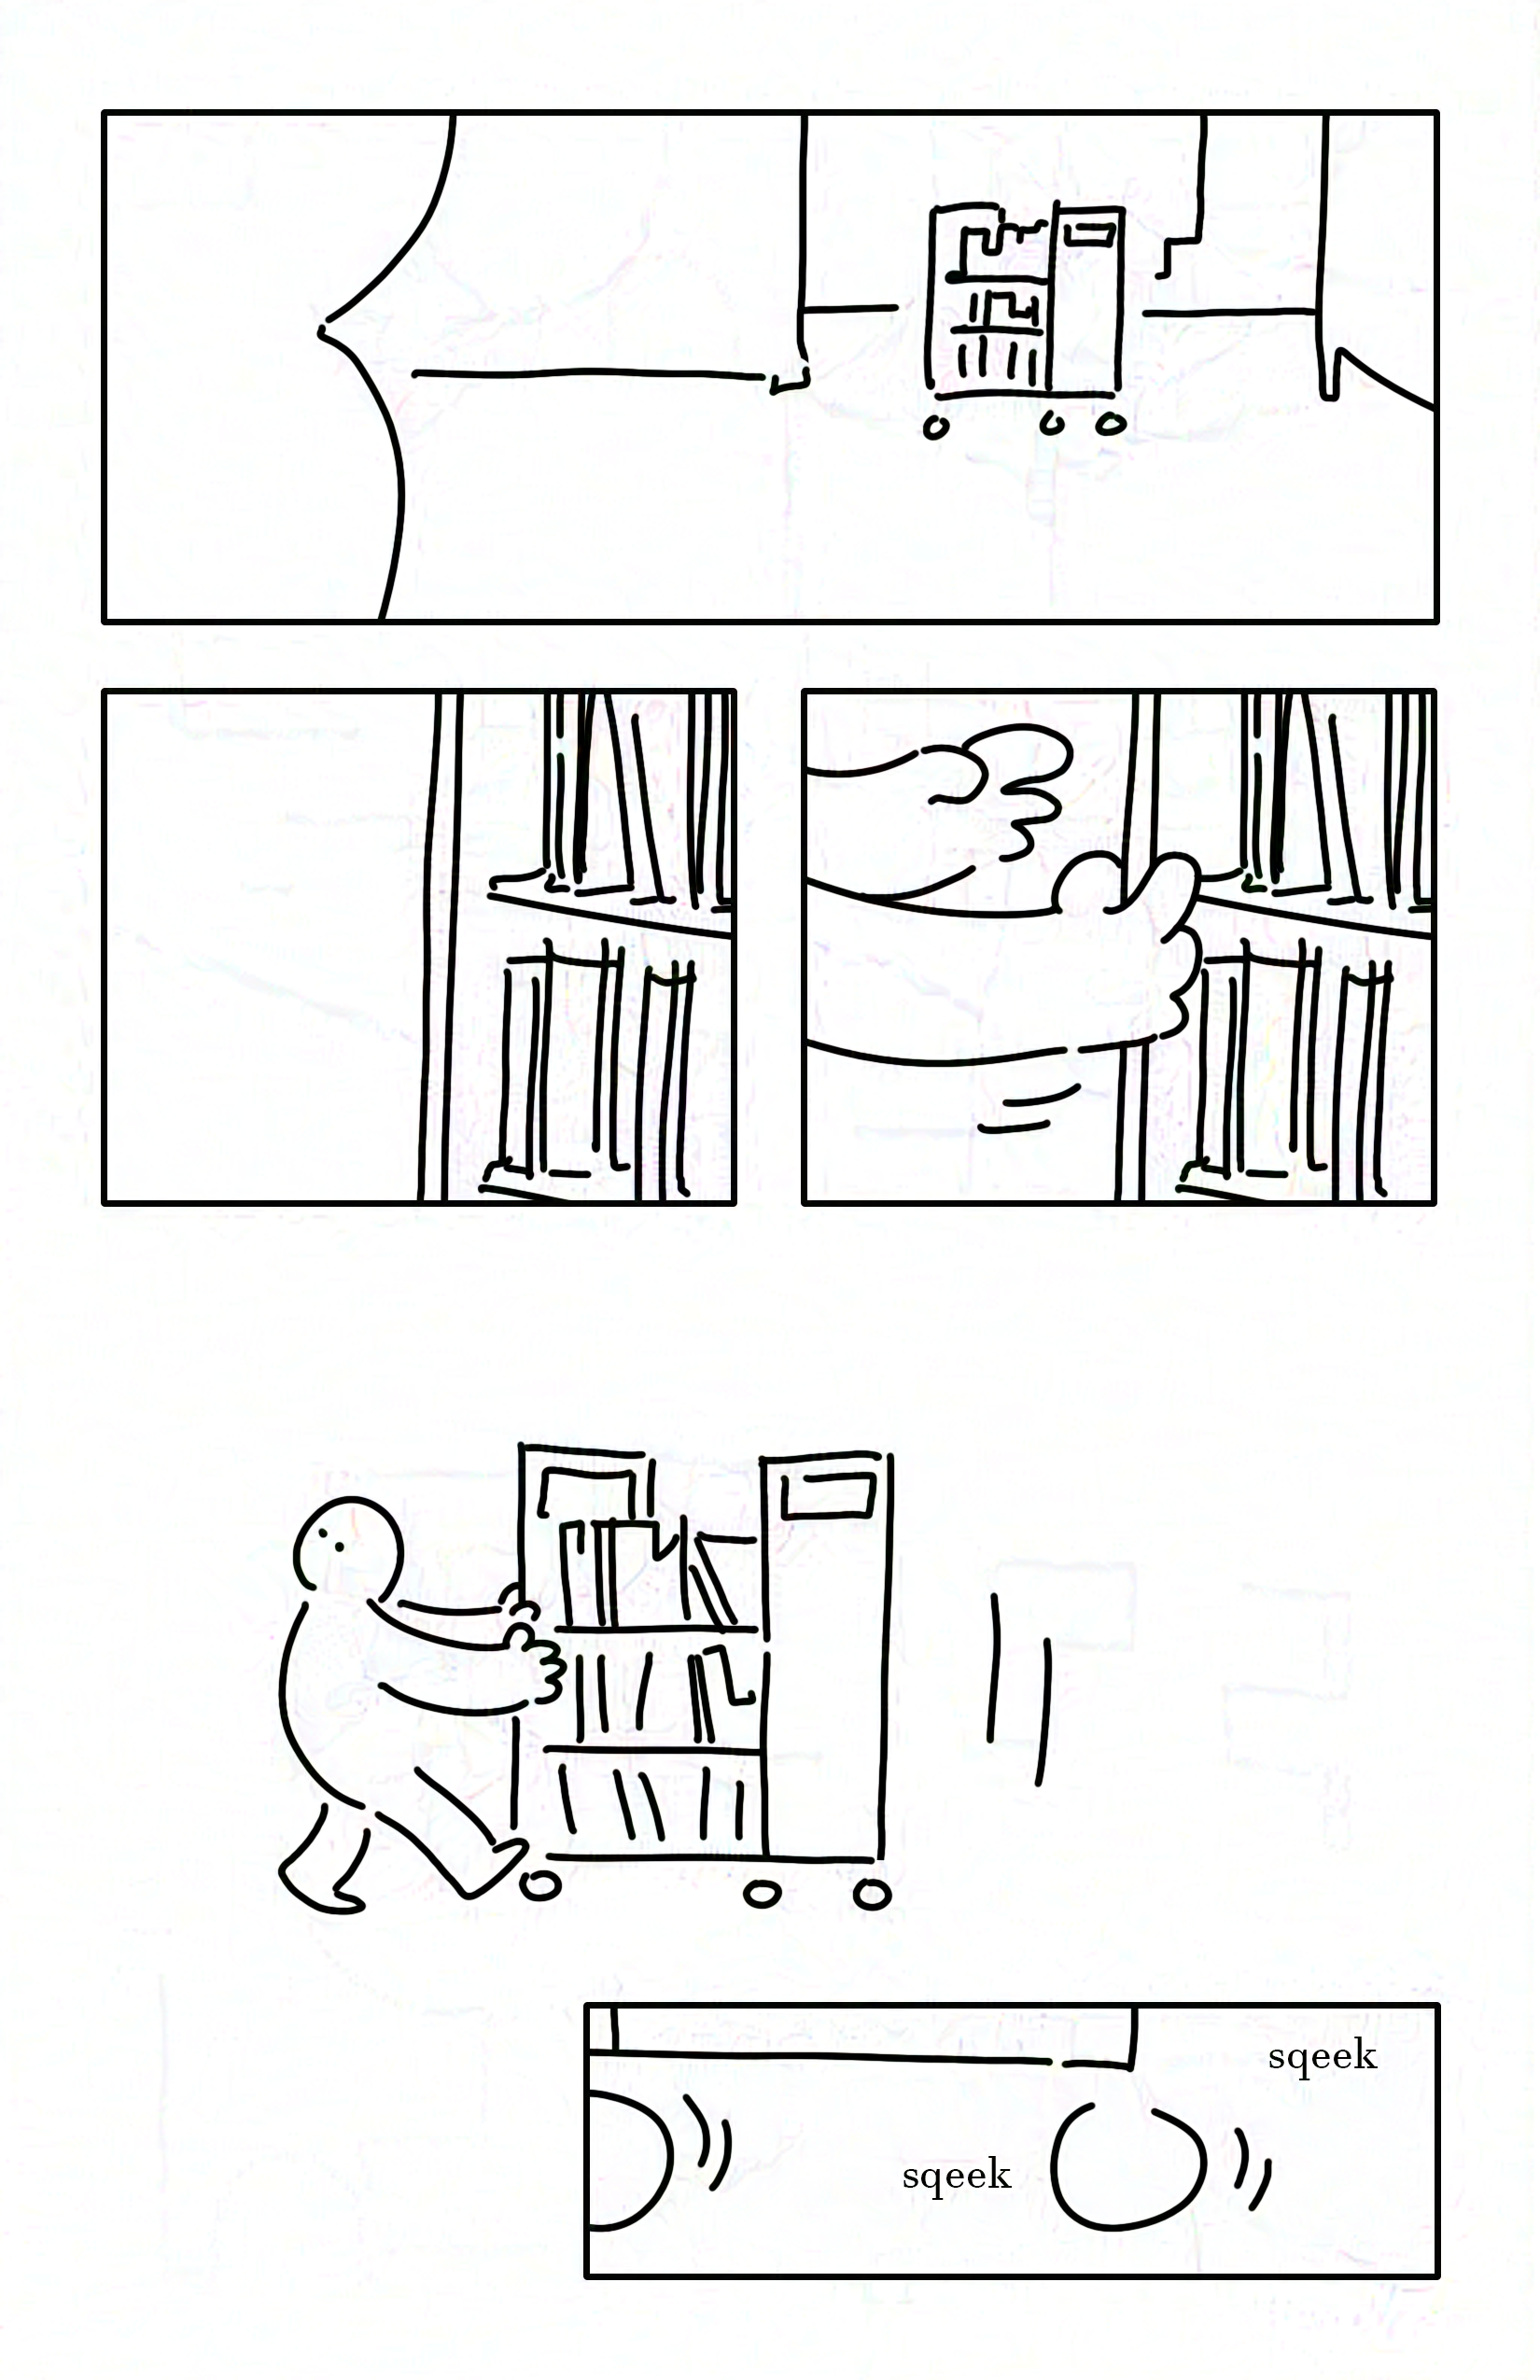 Panel 1: The kid's silhouette in the foreground looking at the cart of books.
Panel 2: Close-up of the shelves on the cart of books, filled with books.
Panel 3: The kid's hands reaching to grab the edge of the cart.
Panel 4: The kid pulling the cart backwards while looking behind them.
Panel 5: Close-up of the cart's wheels going "sqeek sqeek" as they roll.